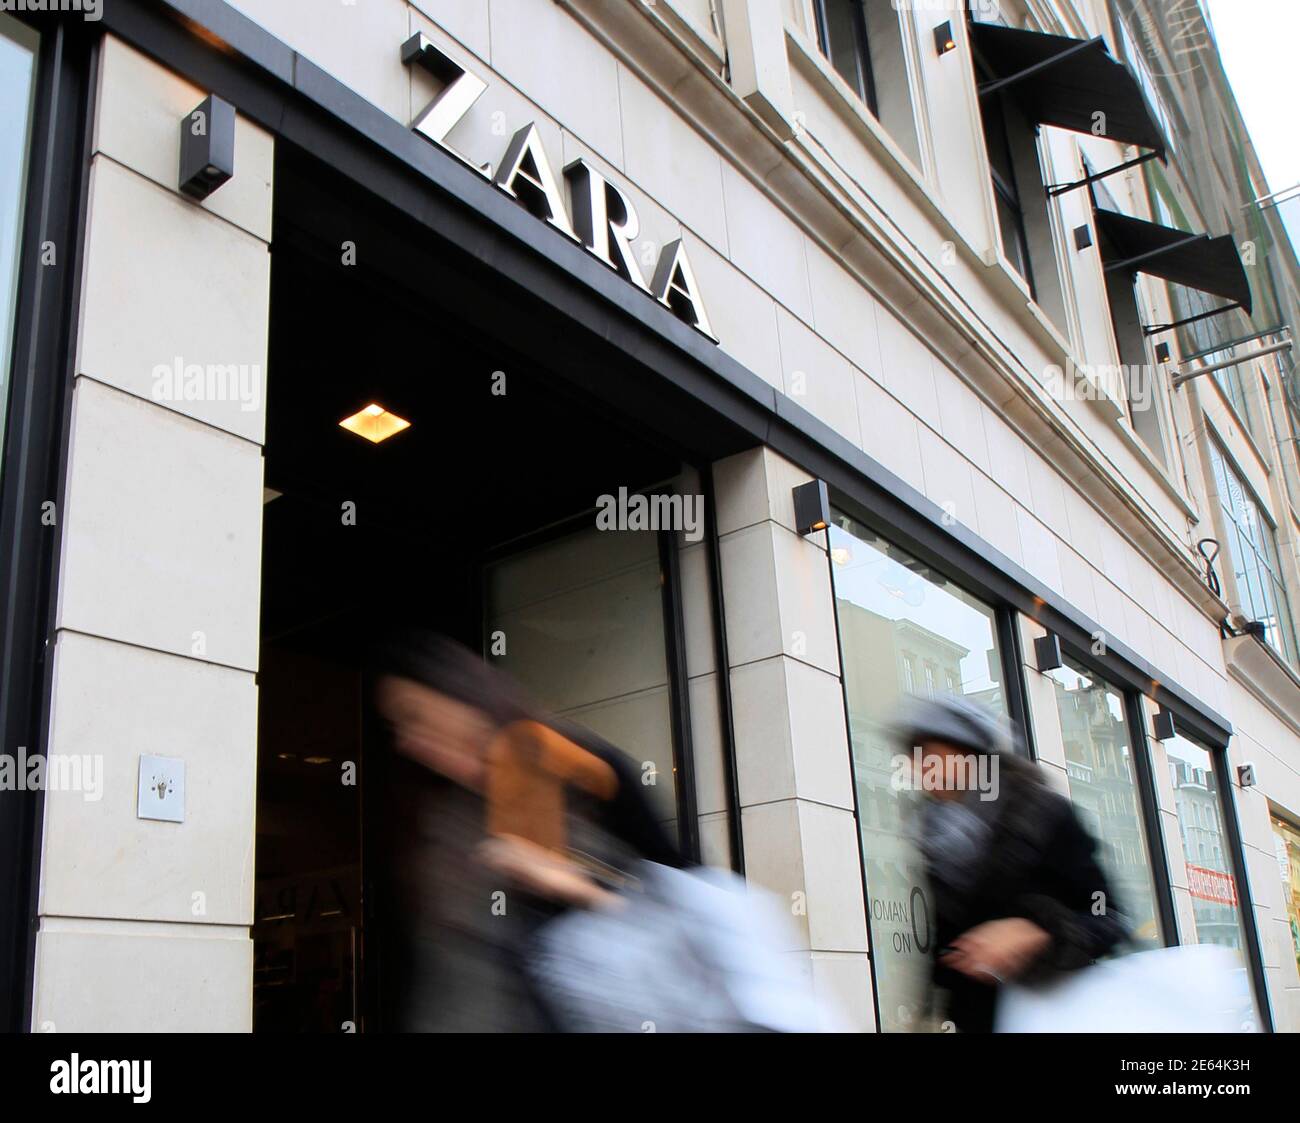 People walk past a fashion retailer Zara shop in central Brussels January  11, 2013. Retailers may succeed in protecting their profit margins from  pressure from a wave of European post-Christmas sales, meaning